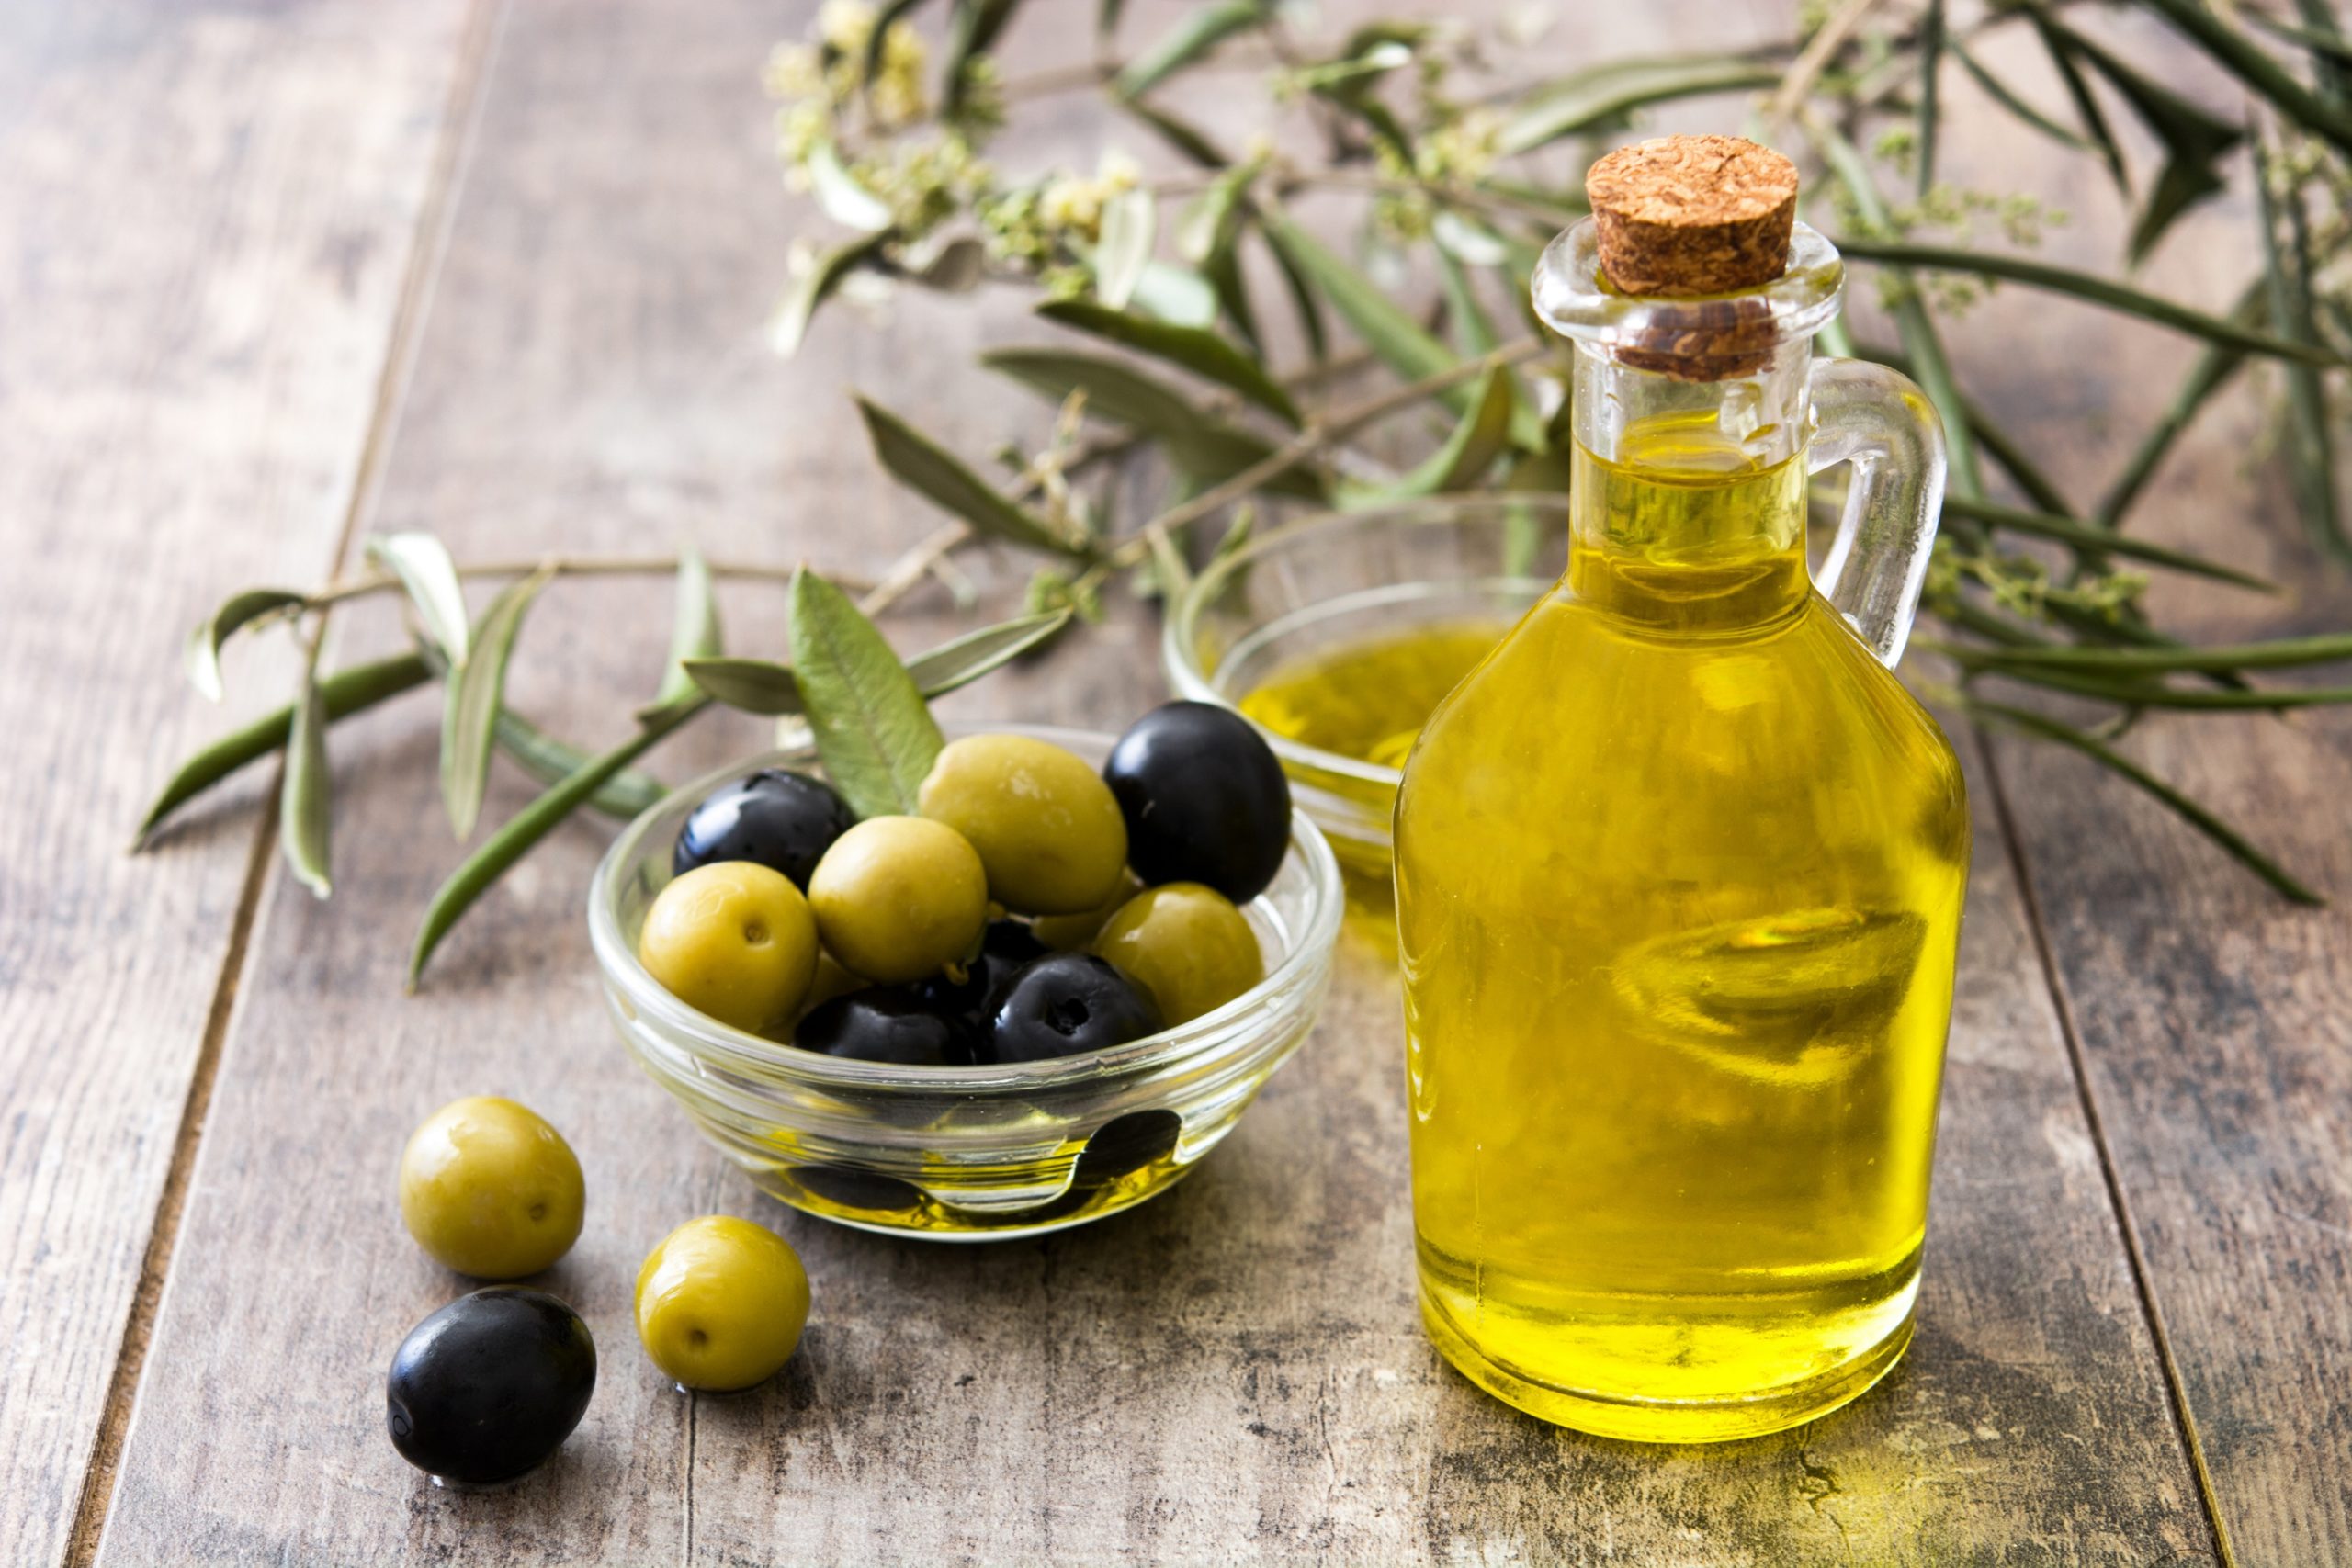 Olive oil polyphenol works against hardening of the arteries